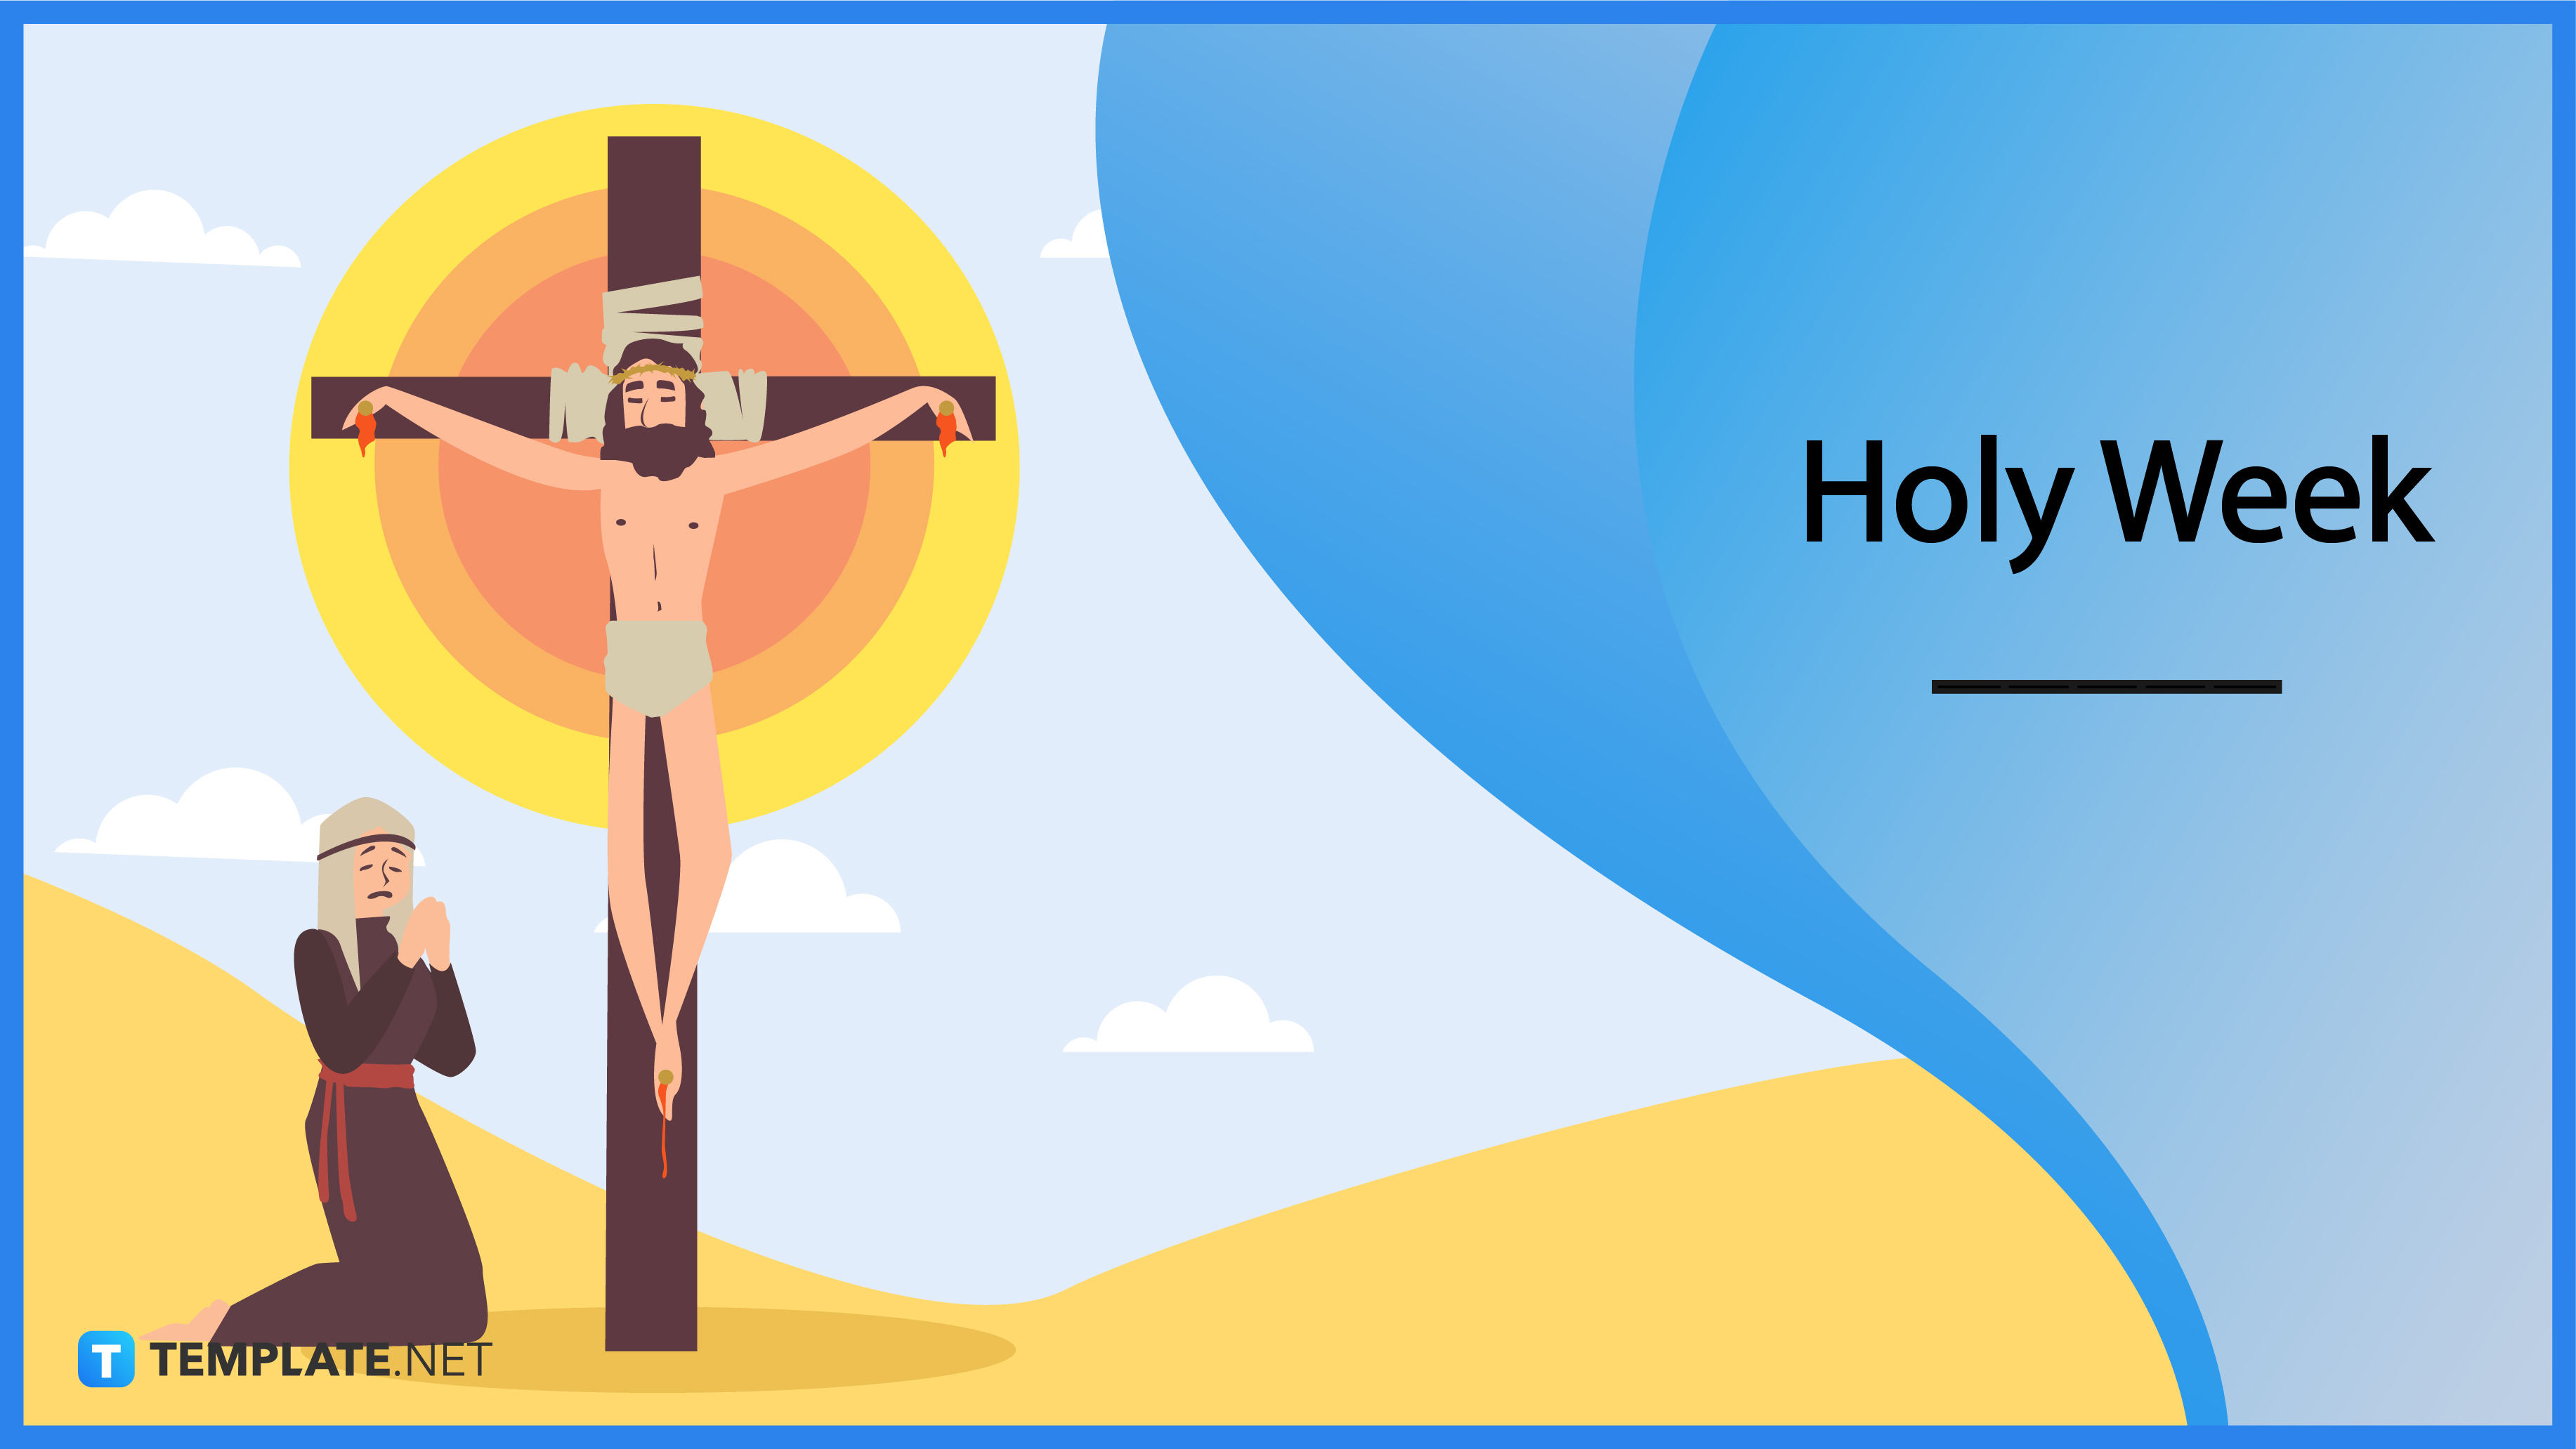 Holy Week When is Holy Week? Meaning, Dates, Purpose